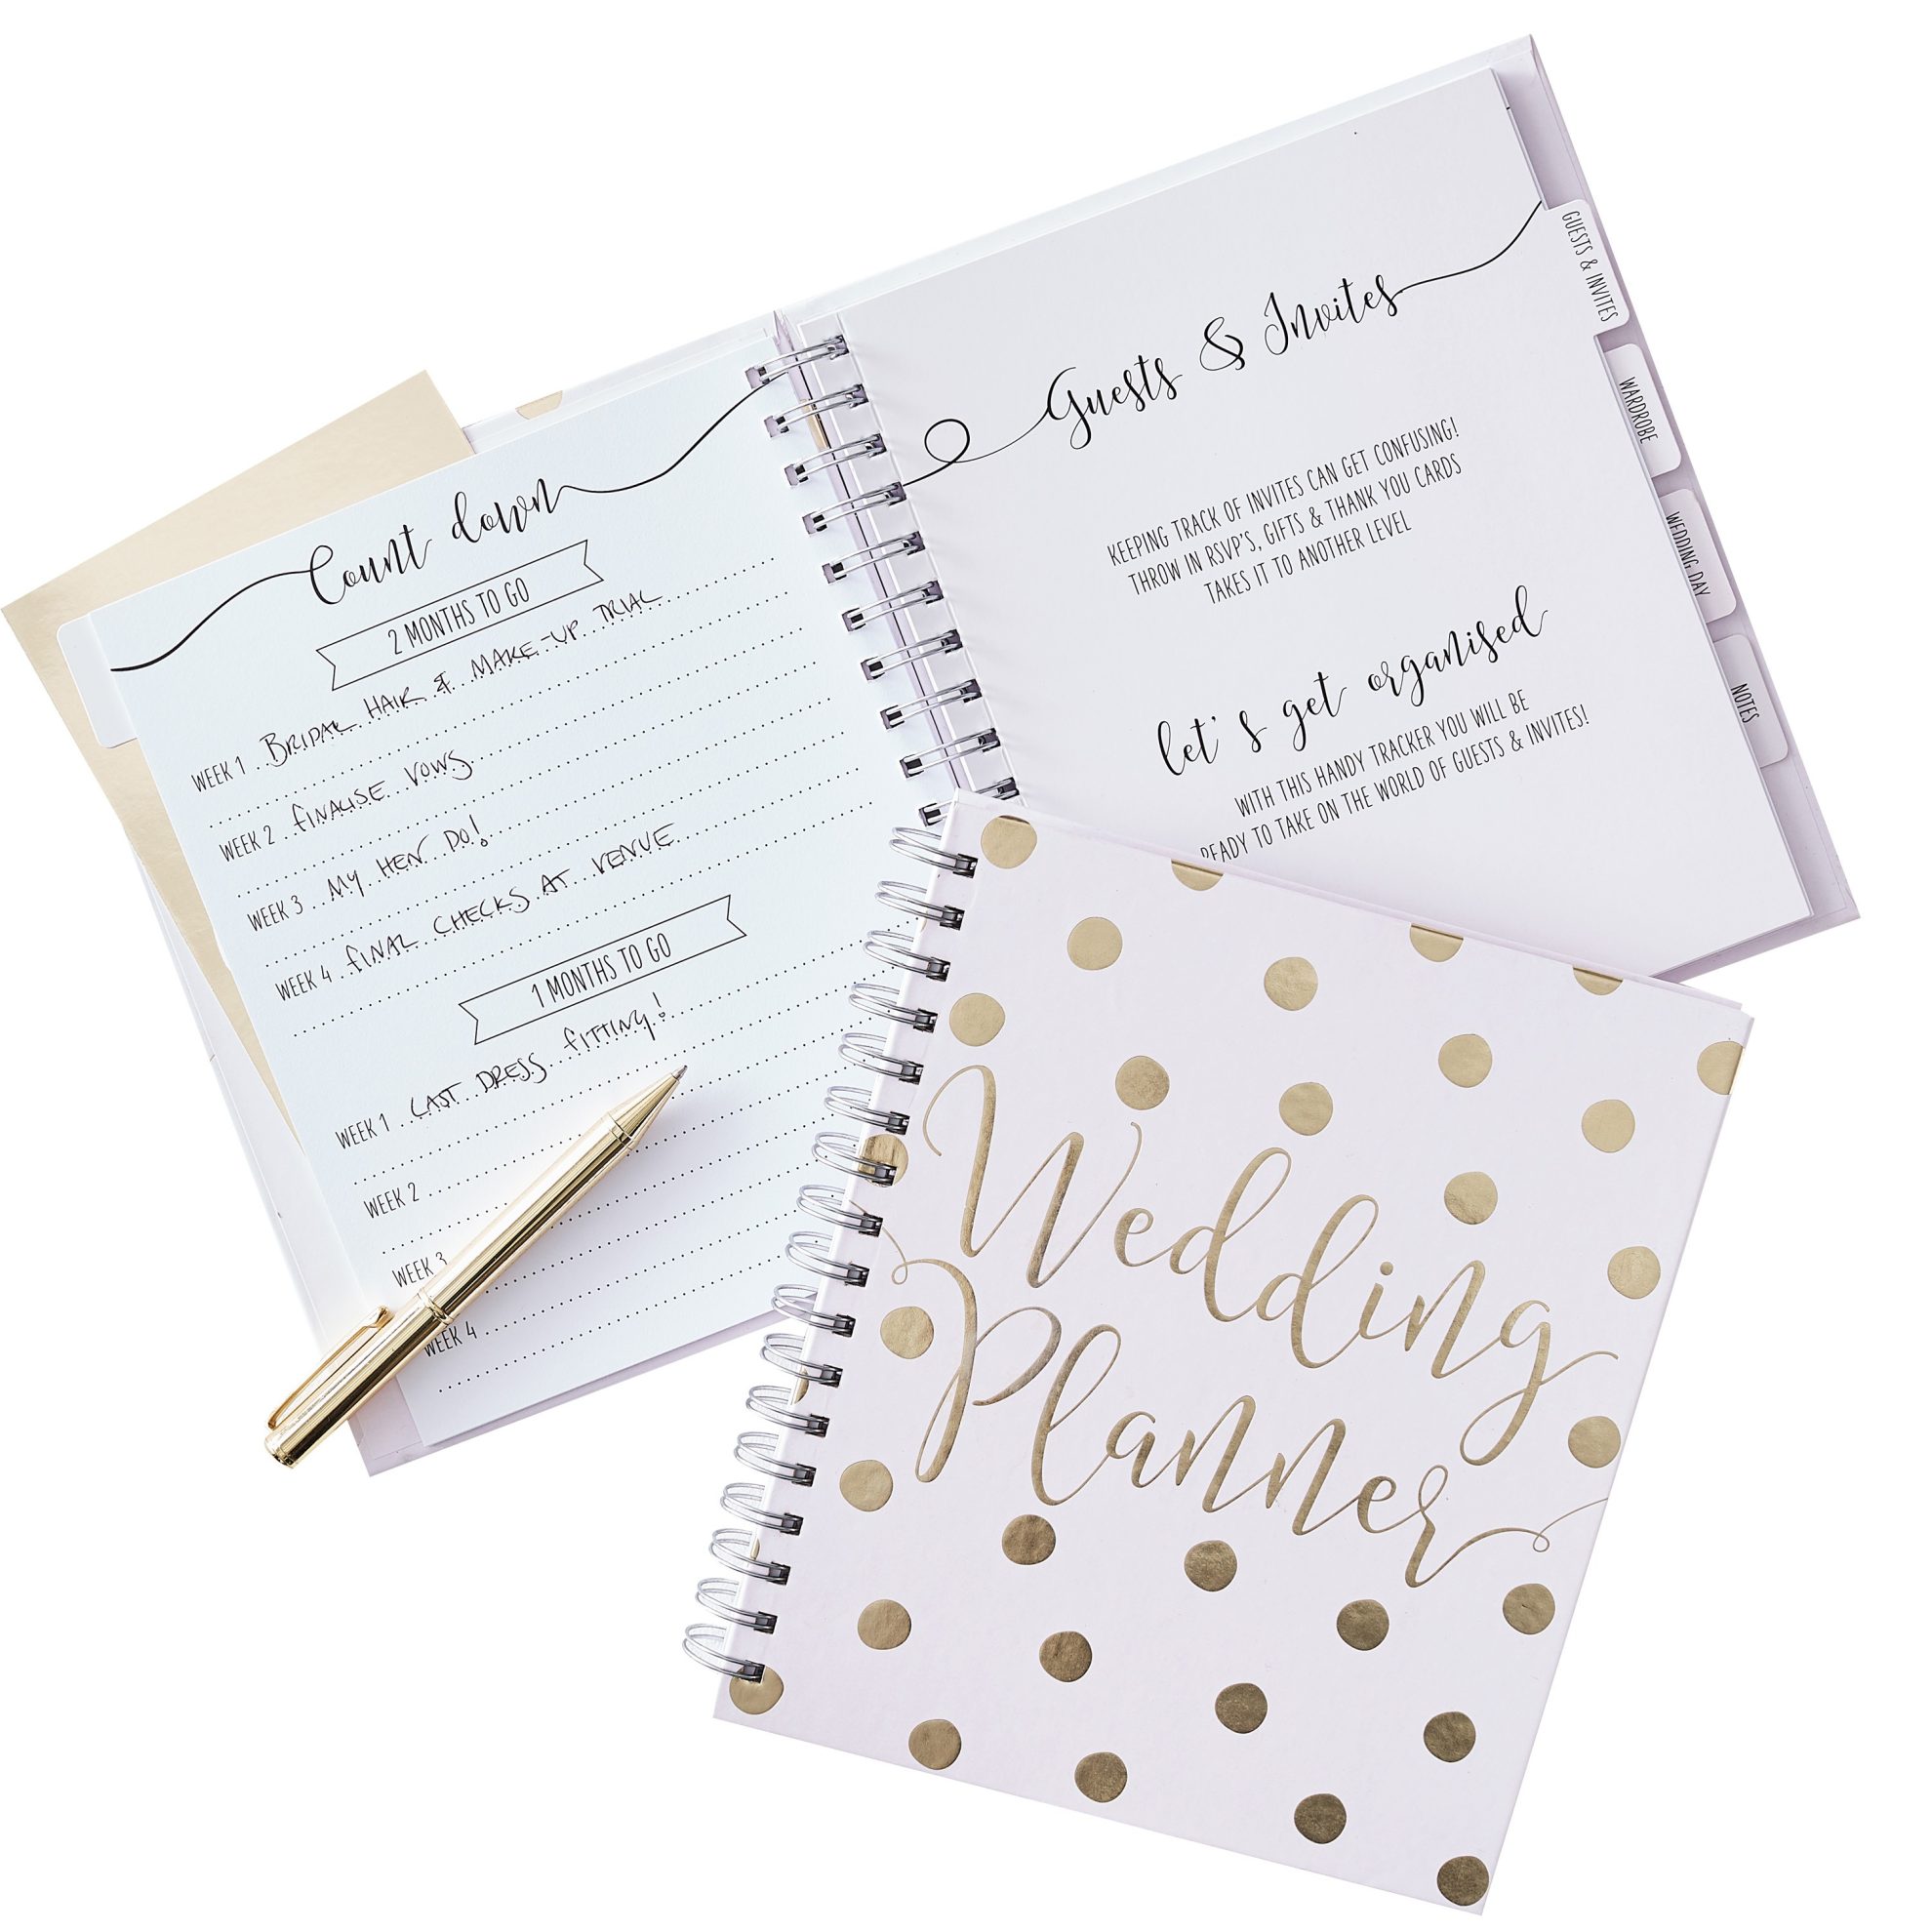 A wedding journal. Featured in 8 Of The Best Engagement Gifts For Any Couple article.